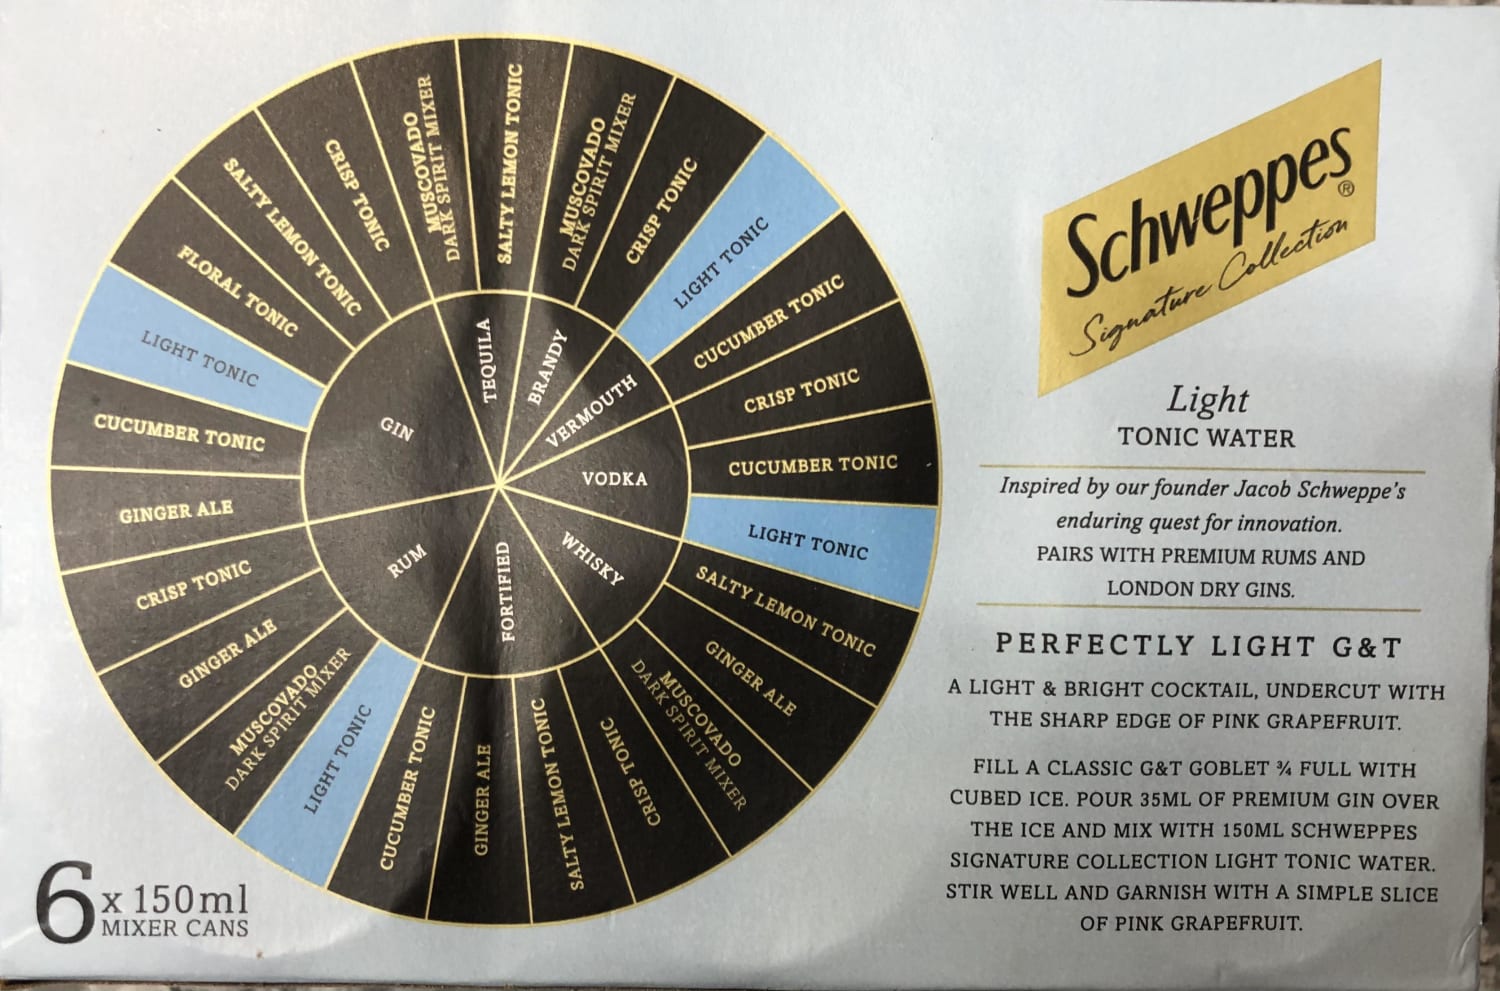 This handy guide I saw on the back of a box of tonics. It shows you some good pairings for various spirits.